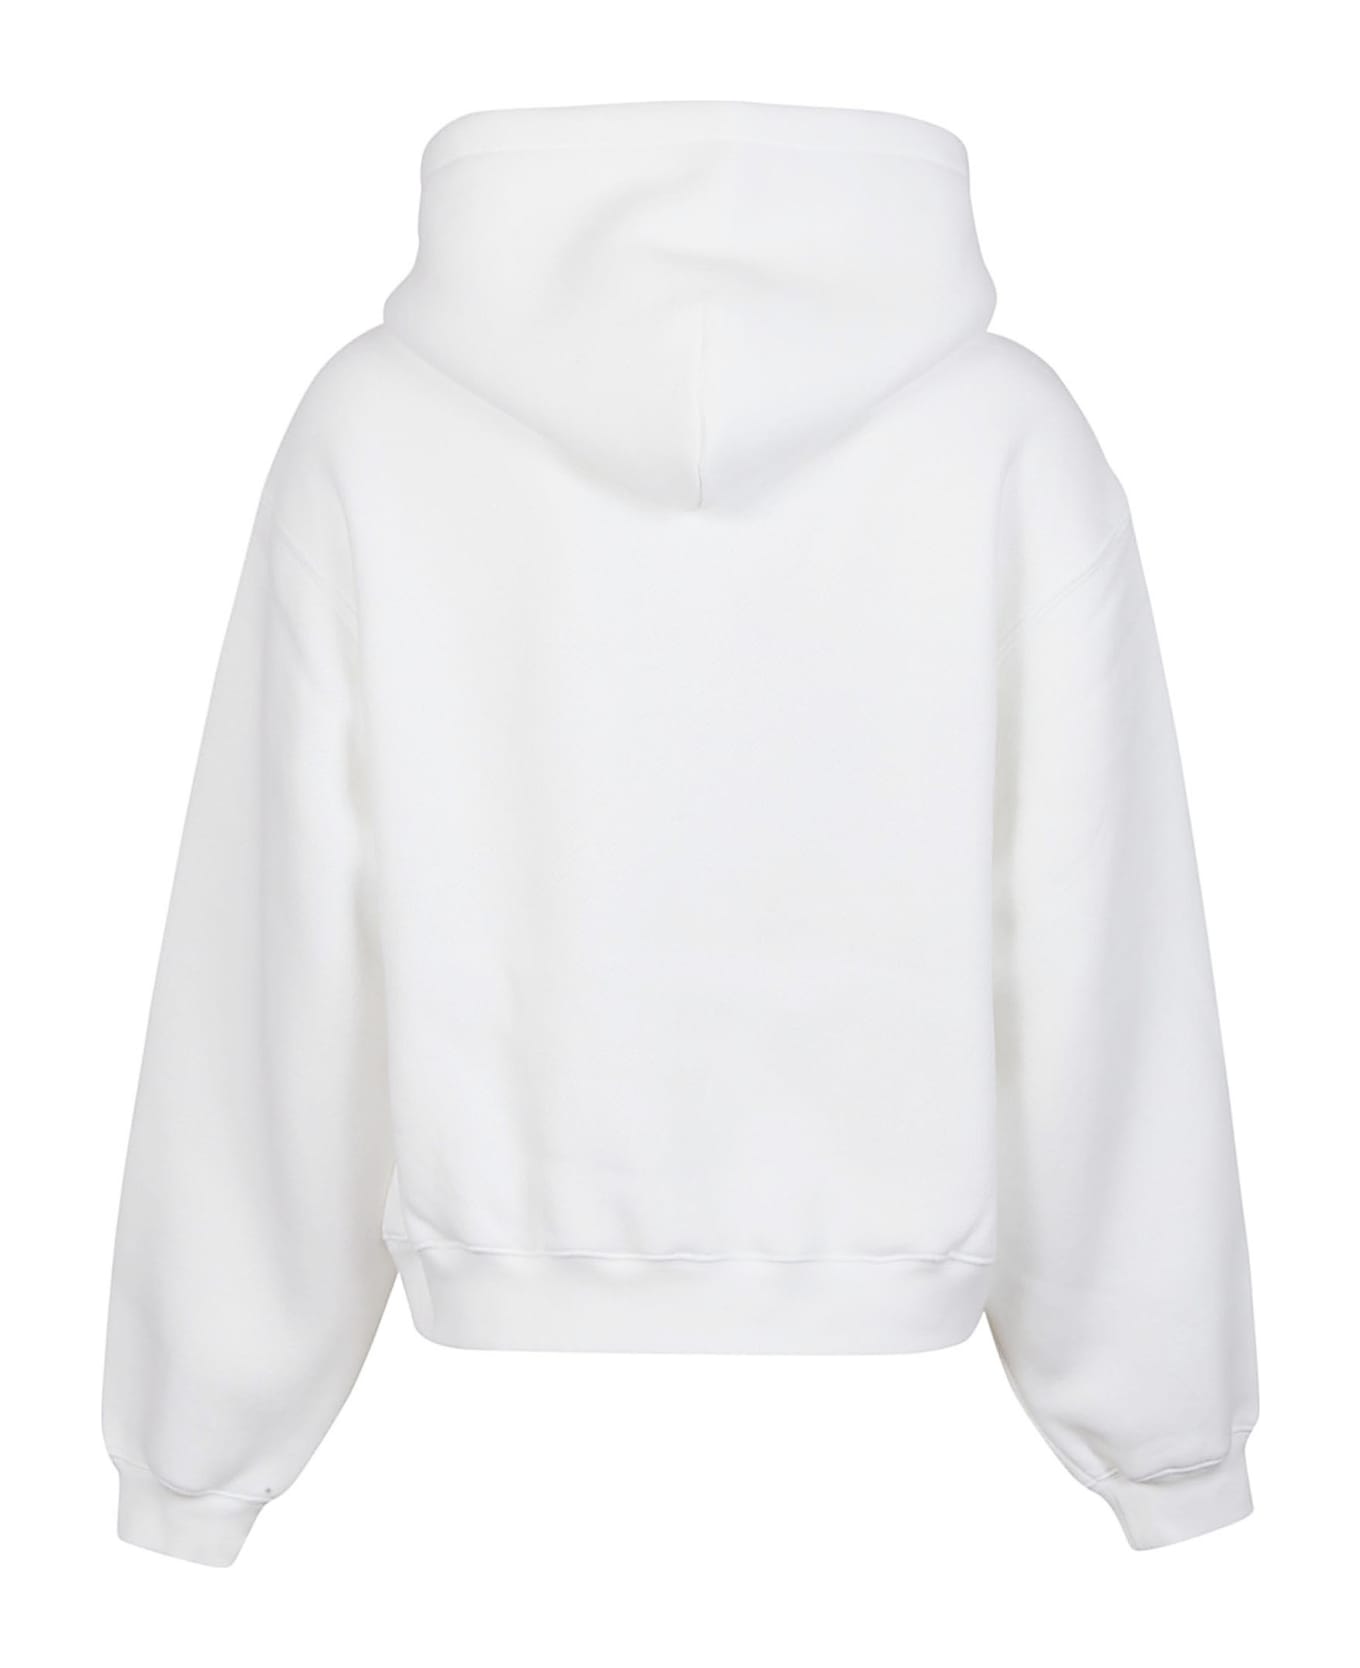 T by Alexander Wang Puff Paint Logo Essential Terry Sweatshirt - White